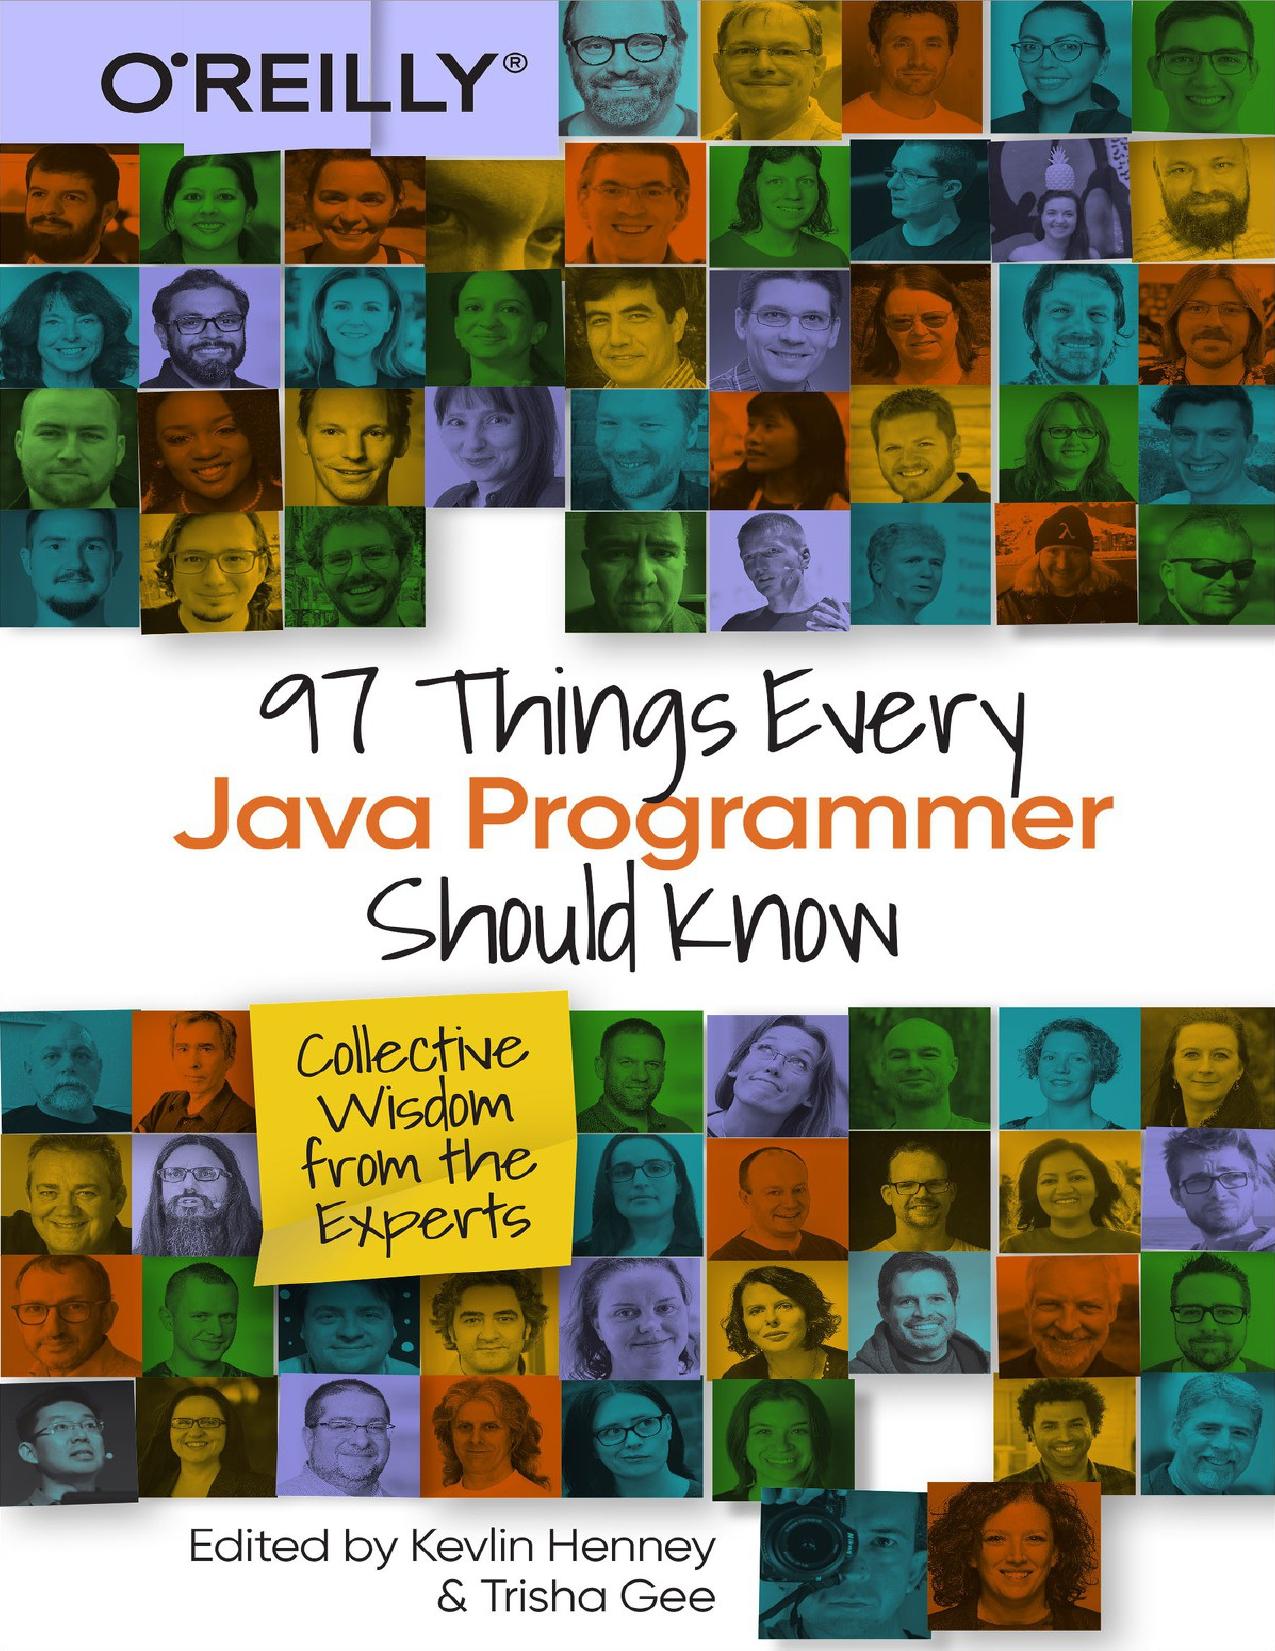 97 Things Every Java Programmer Should Know by Trisha Gee & Kevlin Henney